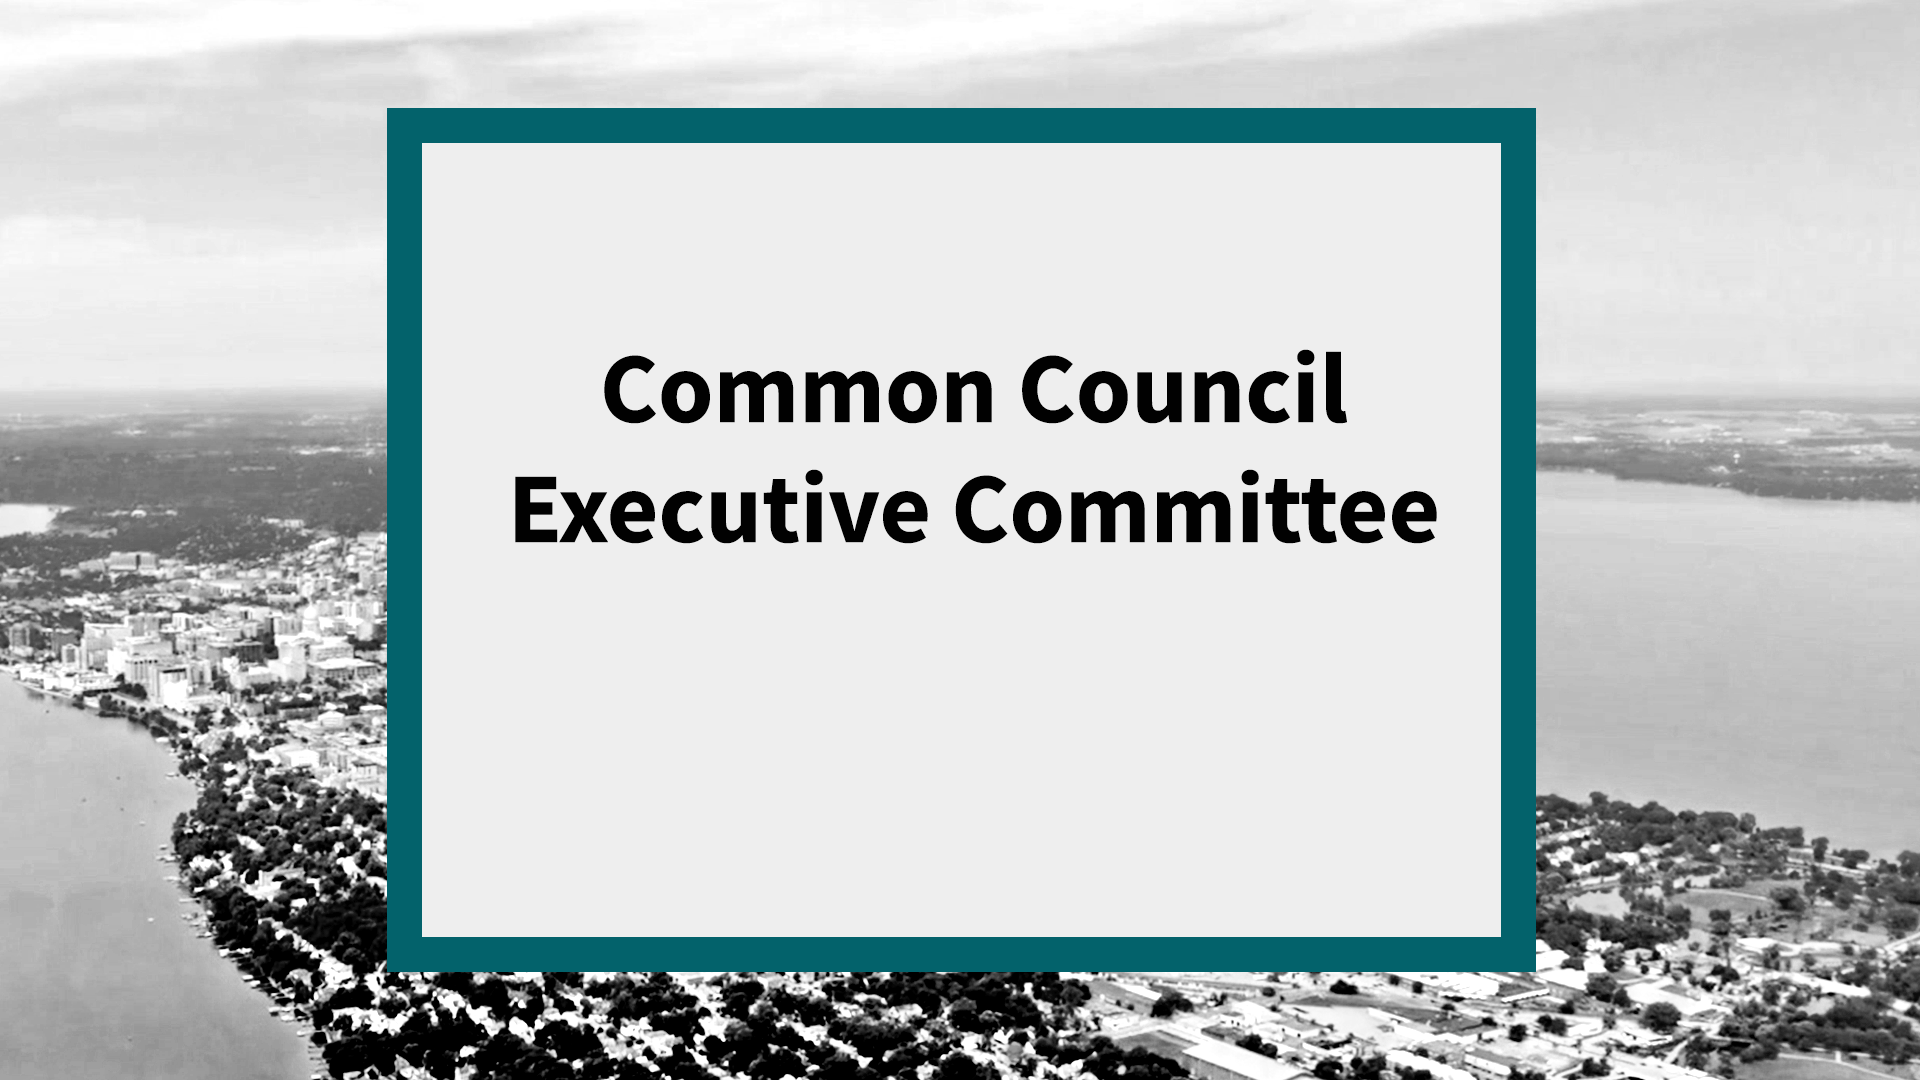 Common Council Executive Committee